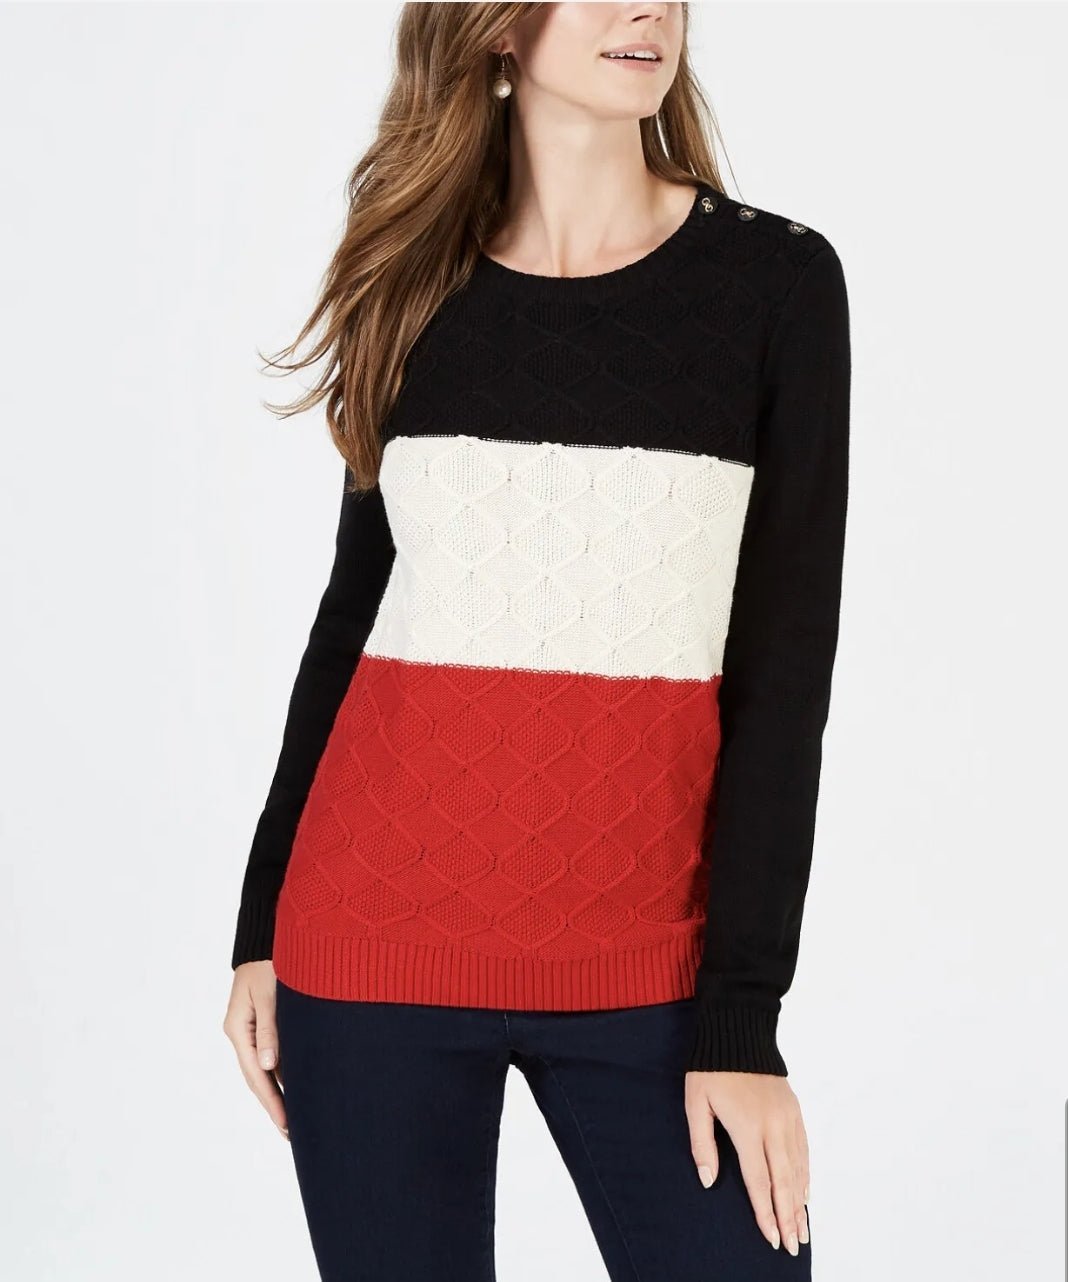 Charter Club Women's Colorblocked Cable-Knit Sweater Deep Black Combo Size XL - BELLEZA'S - Charter Club Women's Colorblocked Cable-Knit Sweater Deep Black Combo Size XL - BELLEZA'S - Sweater -